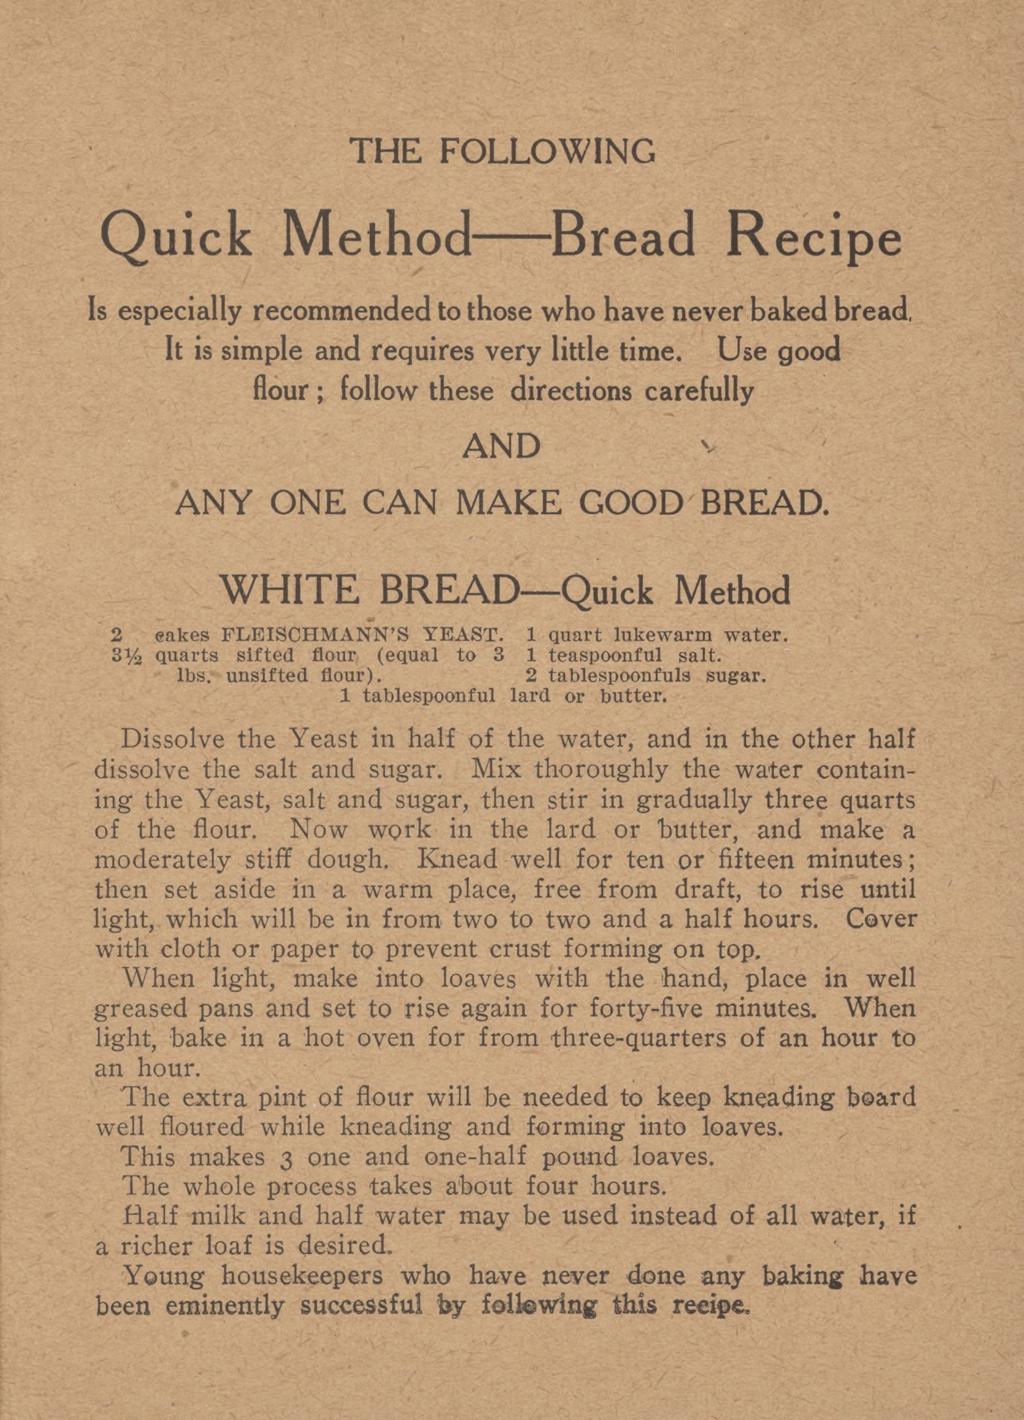 THE FOLLOWING Quick Method--- Bread Recipe Is especially recommended to those who have never baked bread, It is simple and requires very little time.